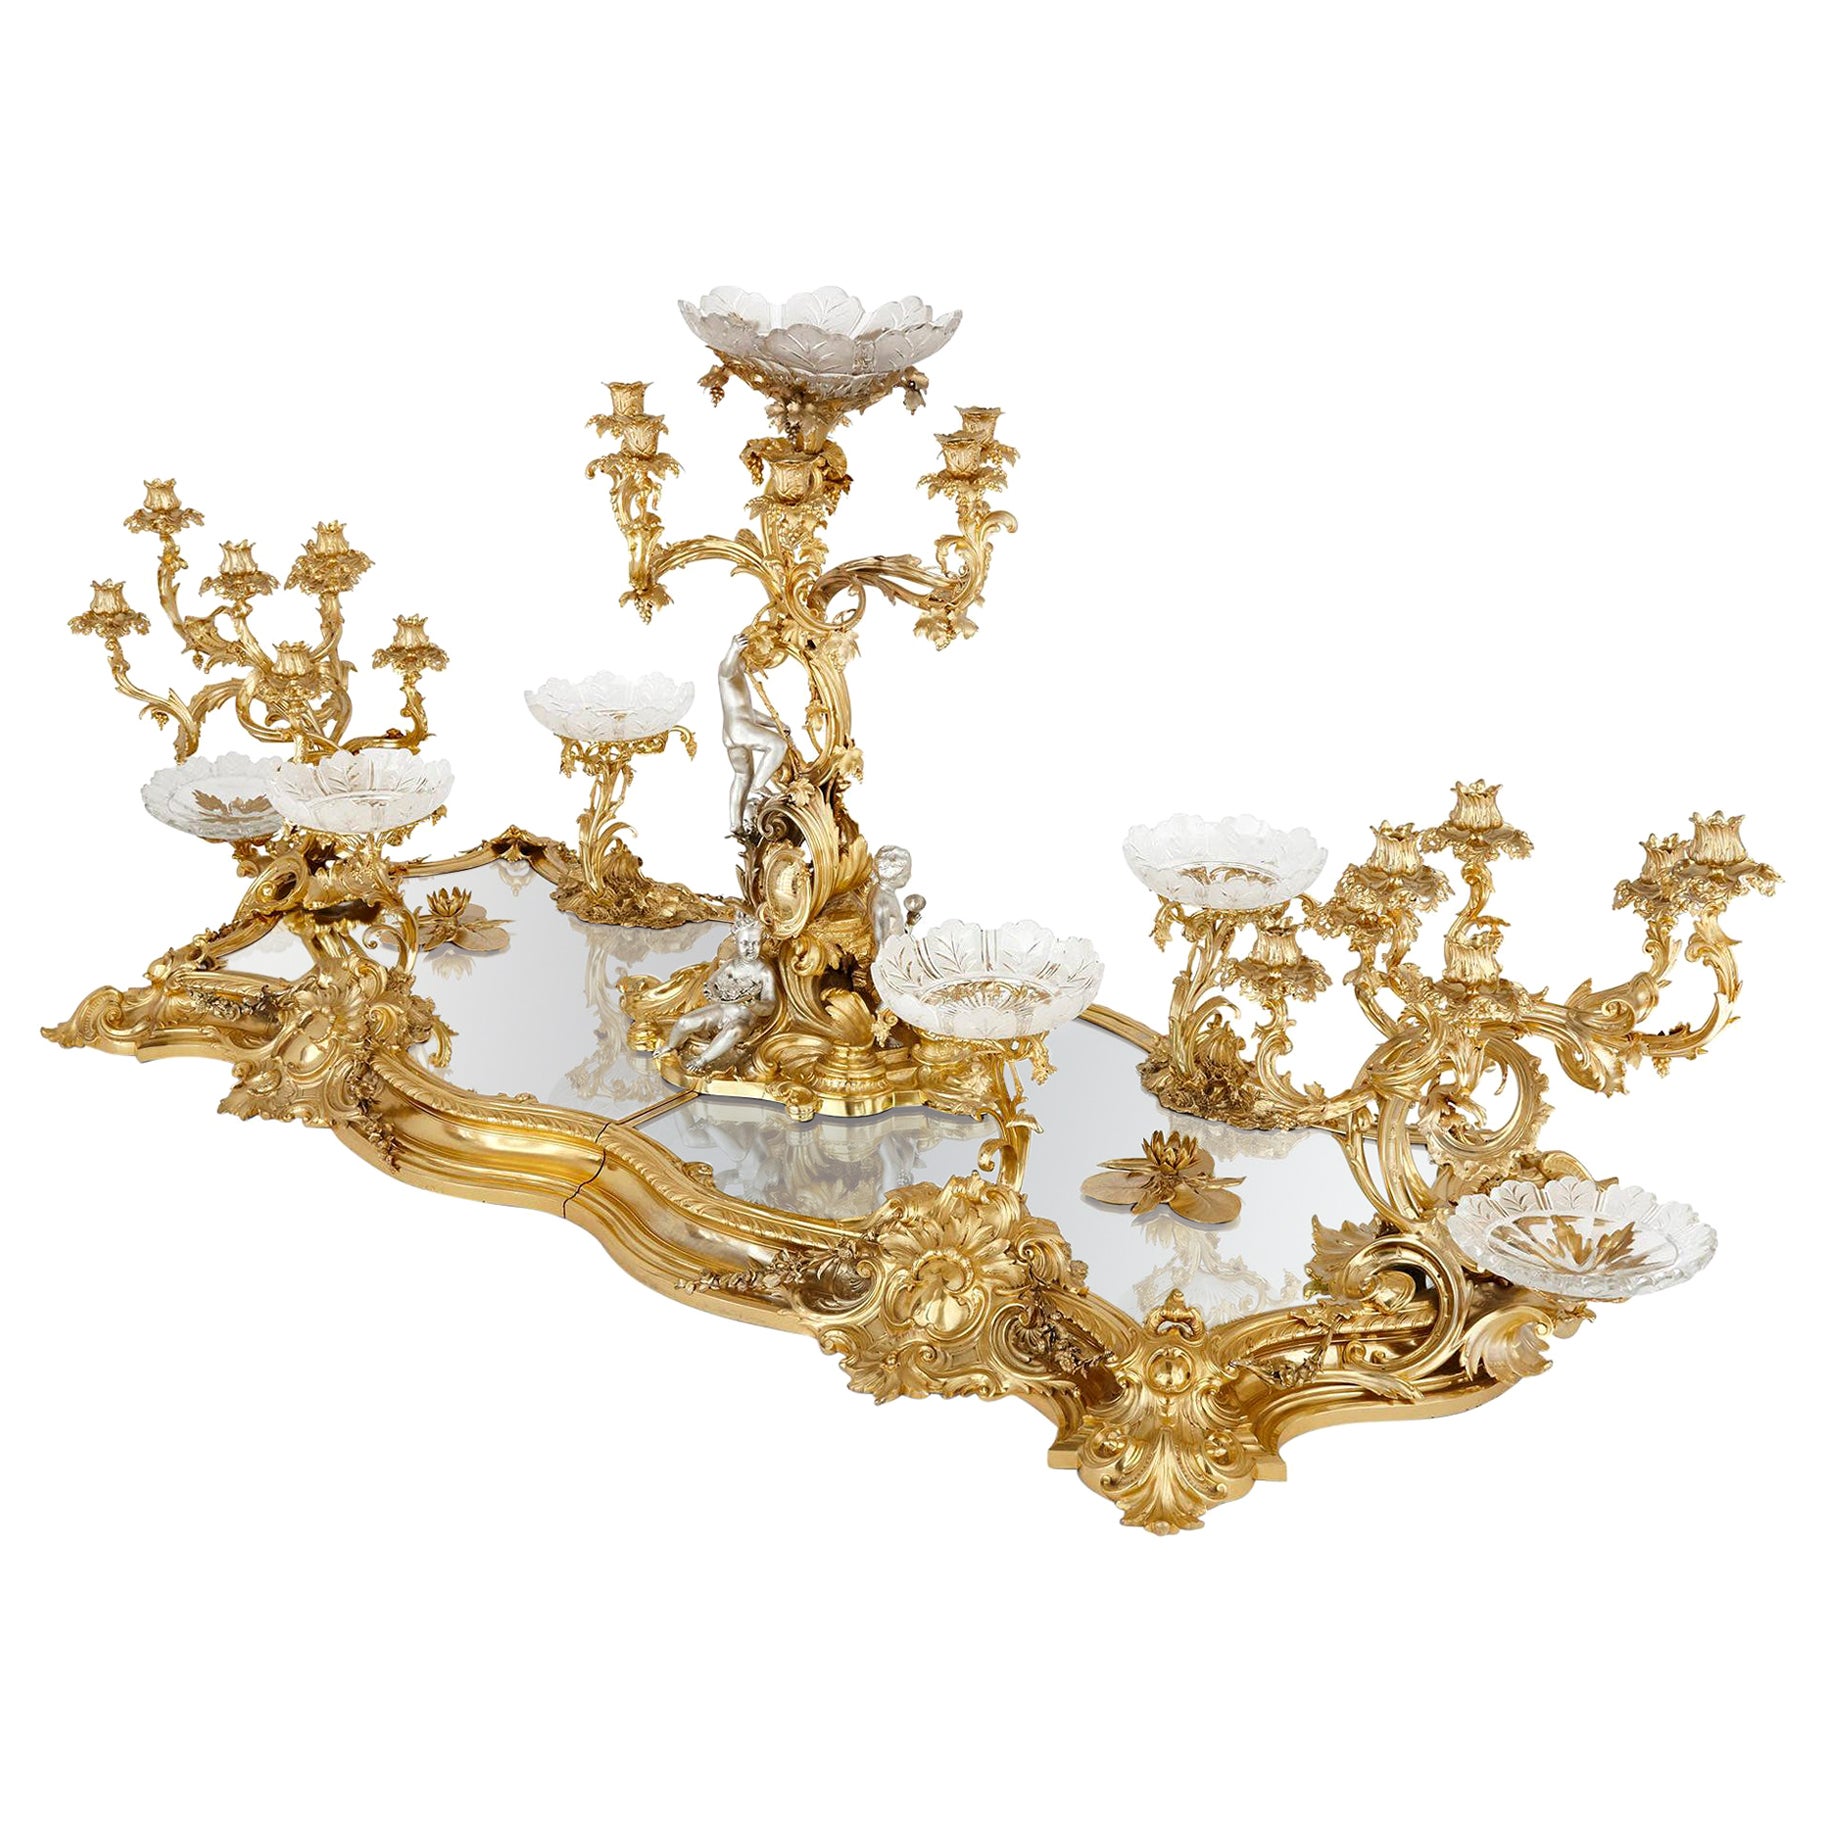 Antique Victorian Louis XIV Style Centrepiece by Barnard & Sons